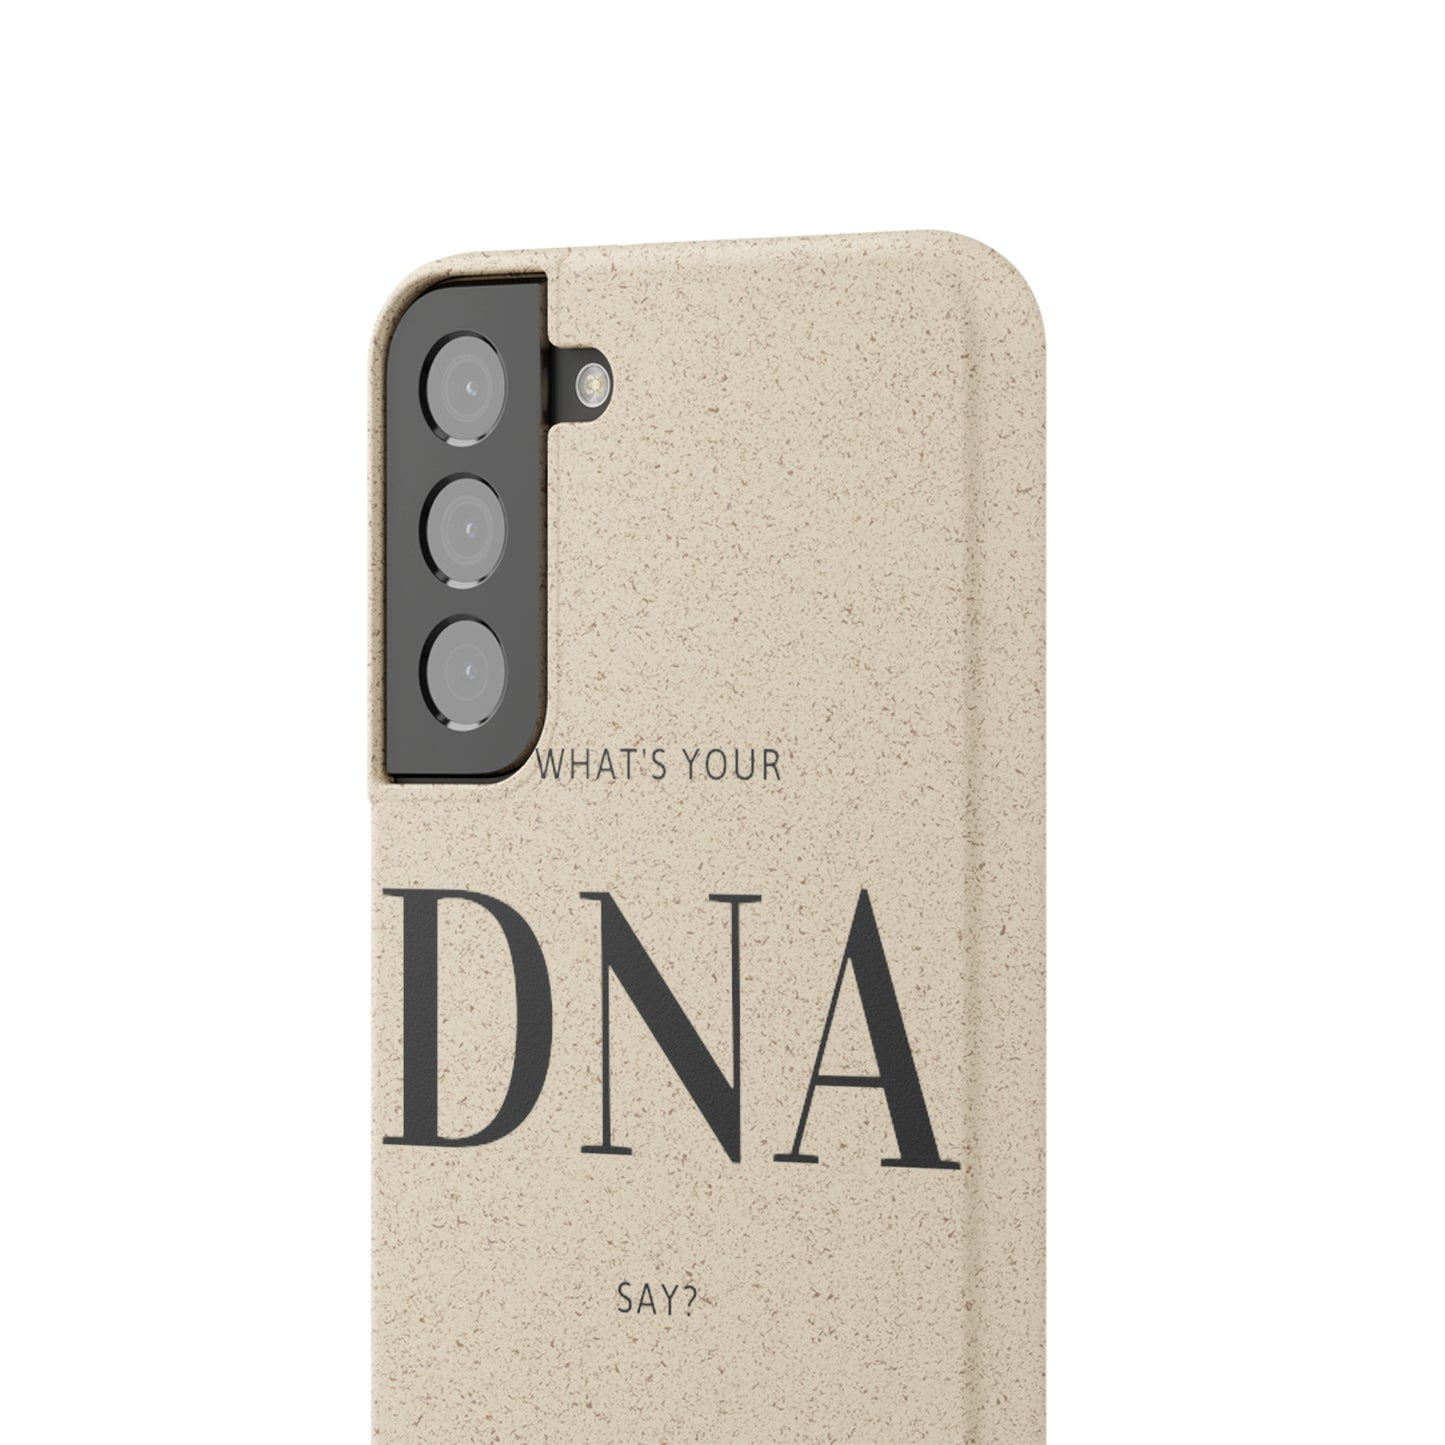 Biodegradable Cases